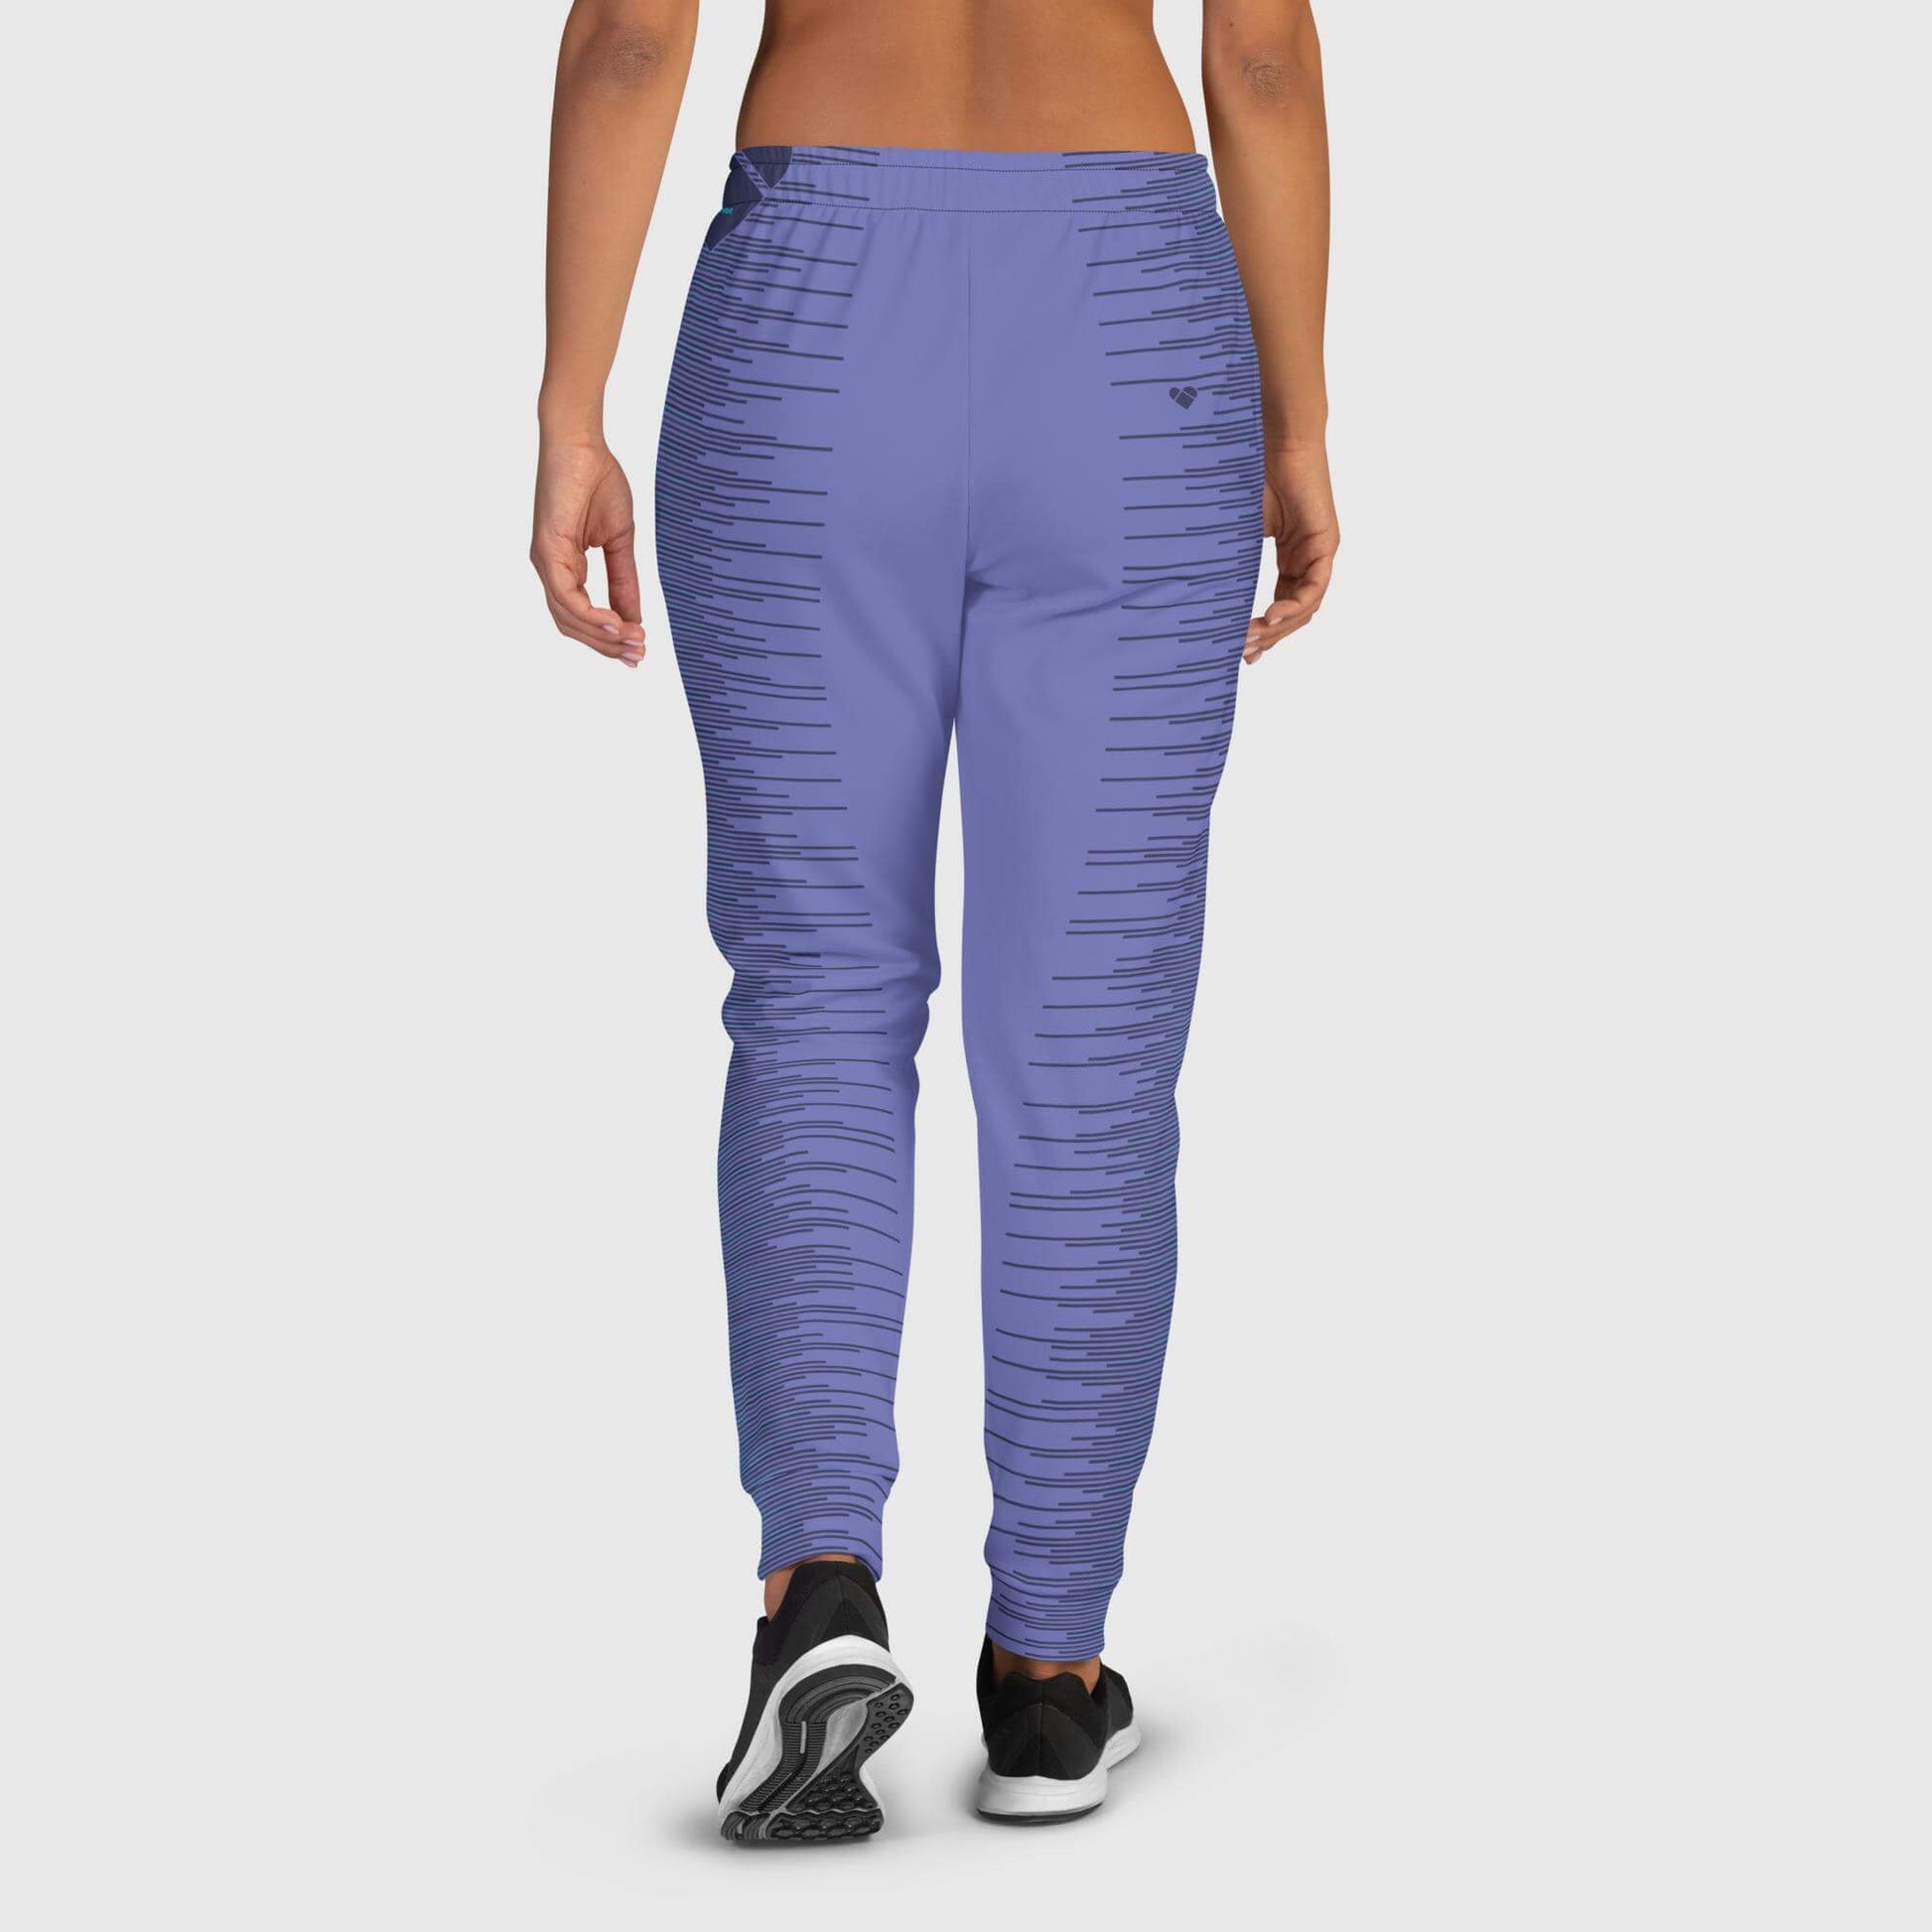 Amor Dual Collection: Periwinkle Dual Joggers - Your Fashion Statement from CRiZ AMOR